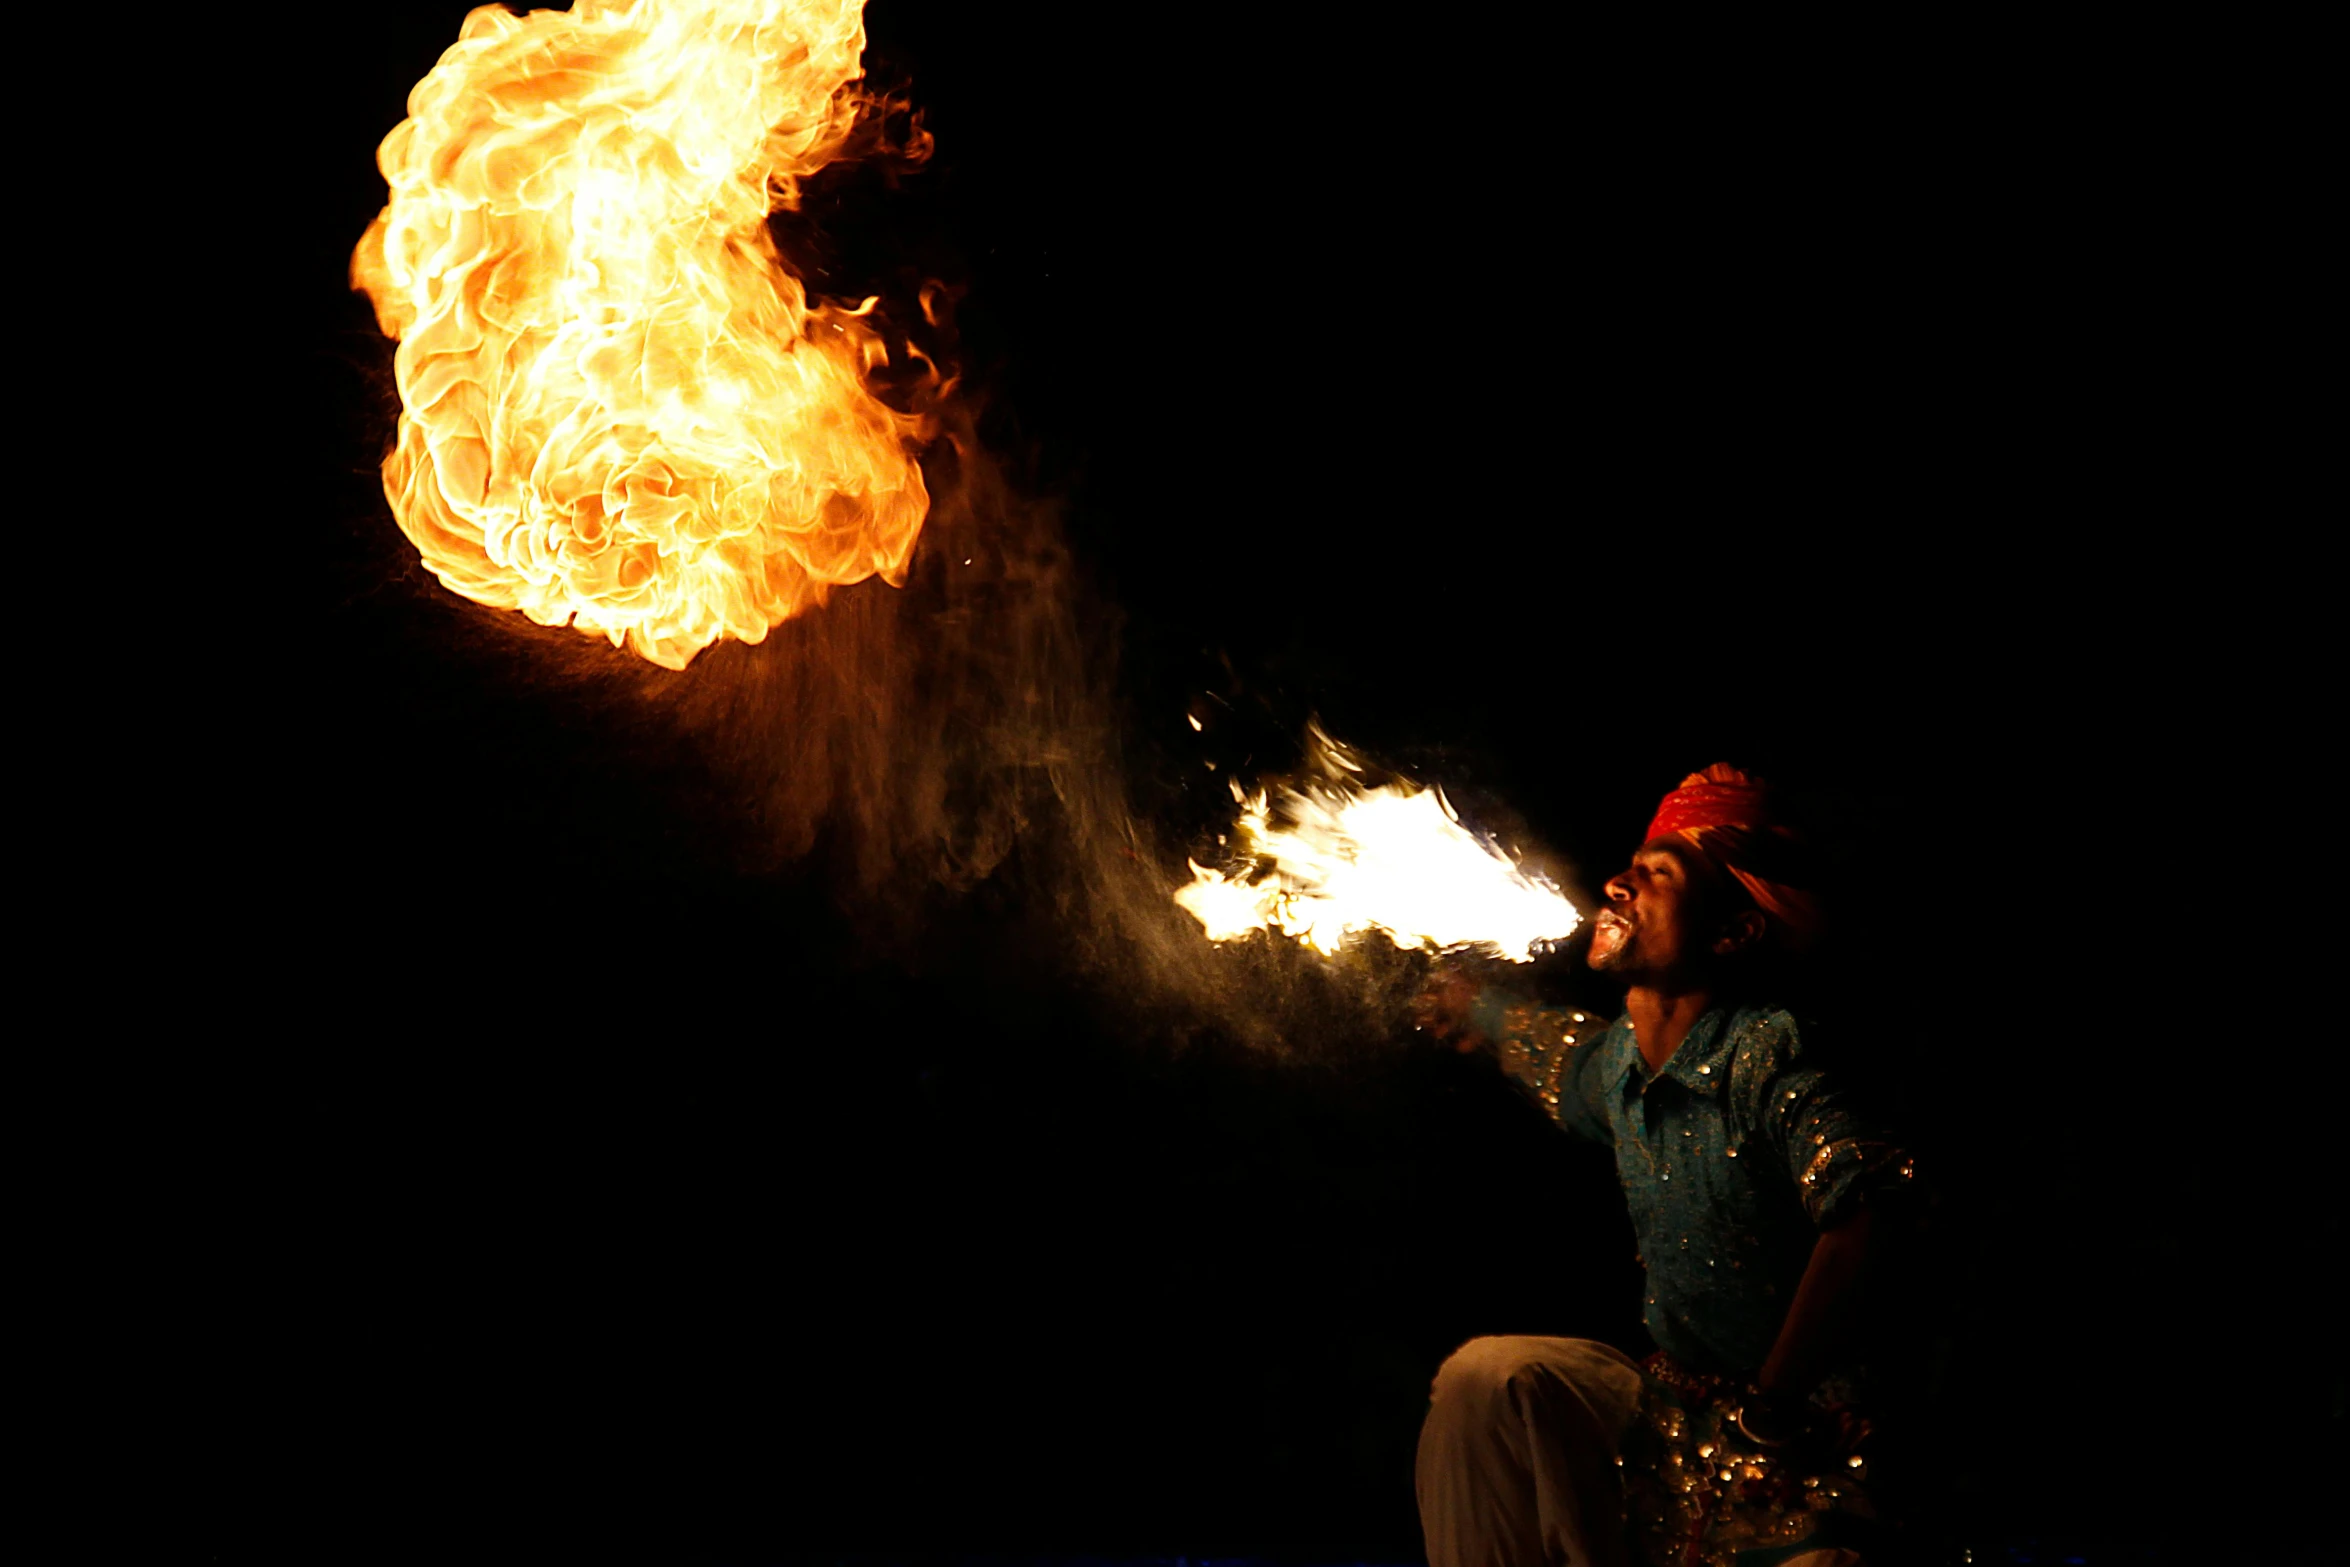 a man that is standing in front of a fire, pexels contest winner, hurufiyya, fire breathing. bowser, performing on stage, avatar image, reuters